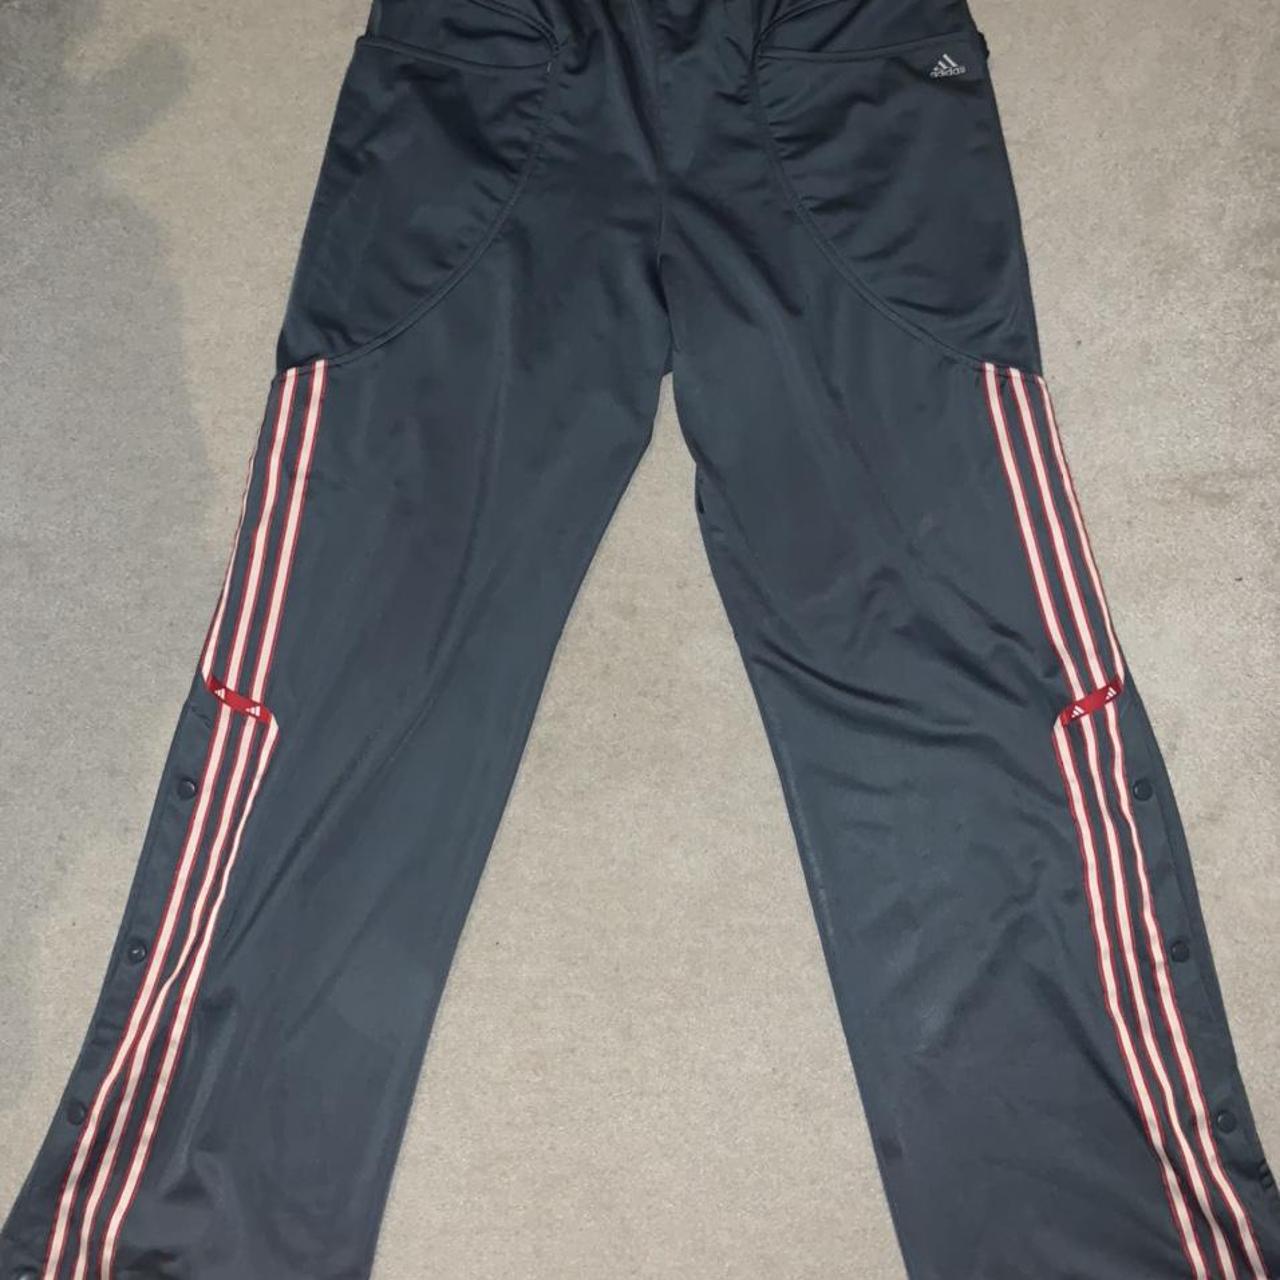 adidas Originals Adibreak Side Popper Track Pants | Where To Buy |  205235432 | The Sole Supplier